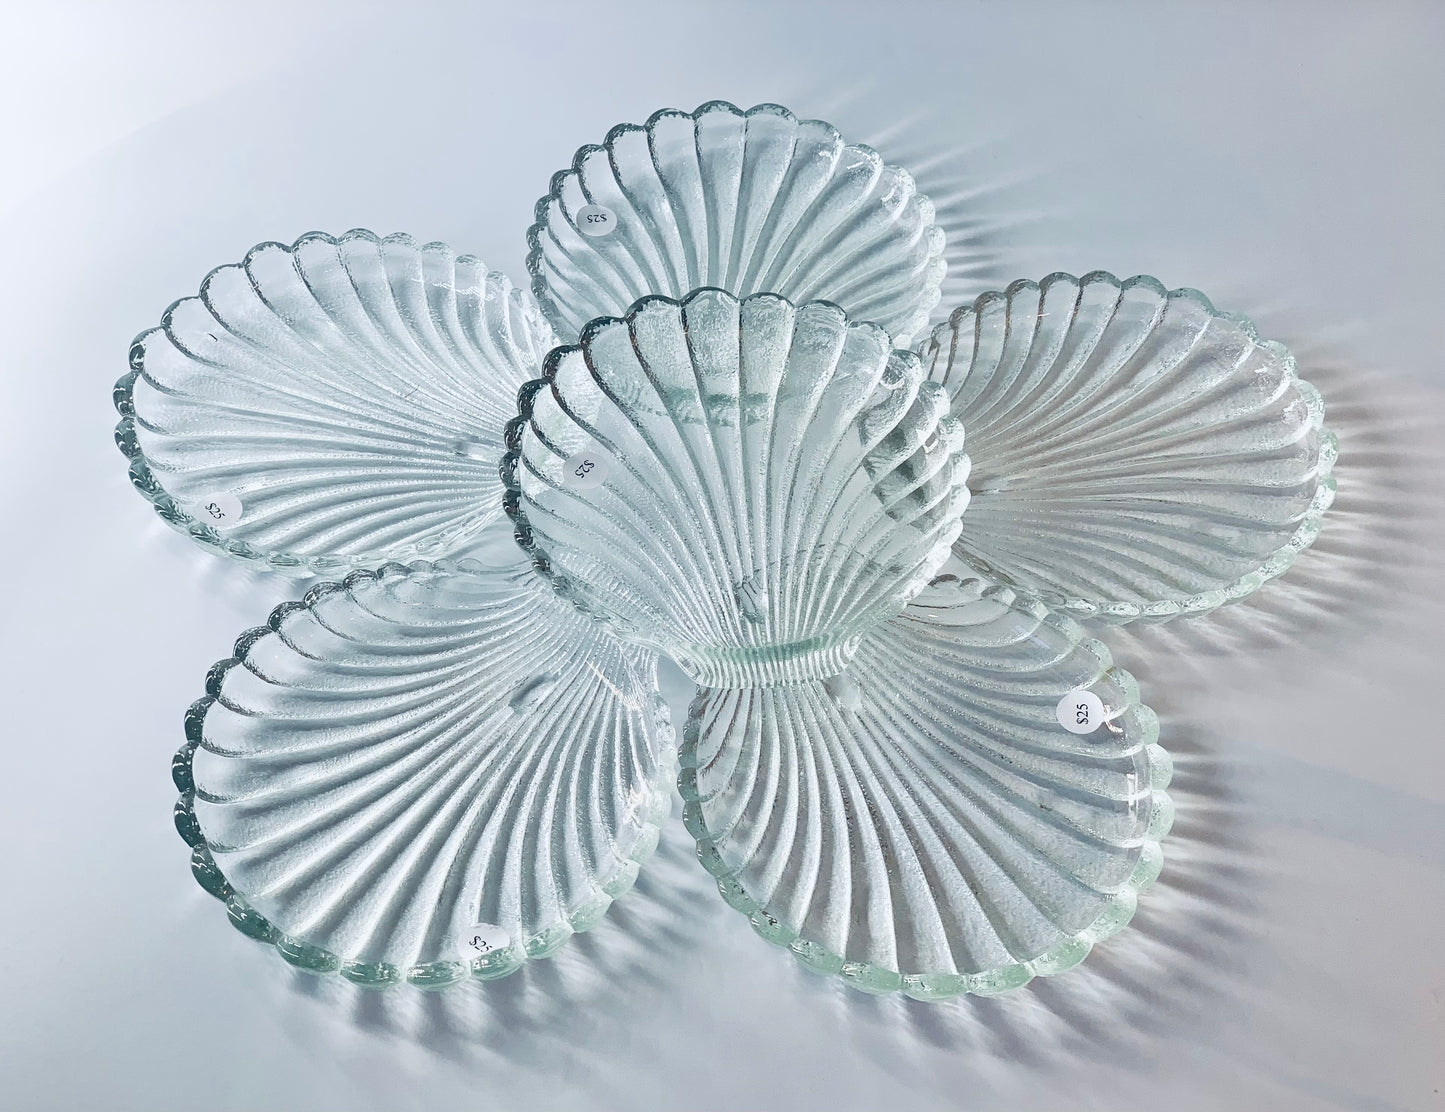 Small serving side plate, shell-shaped glass